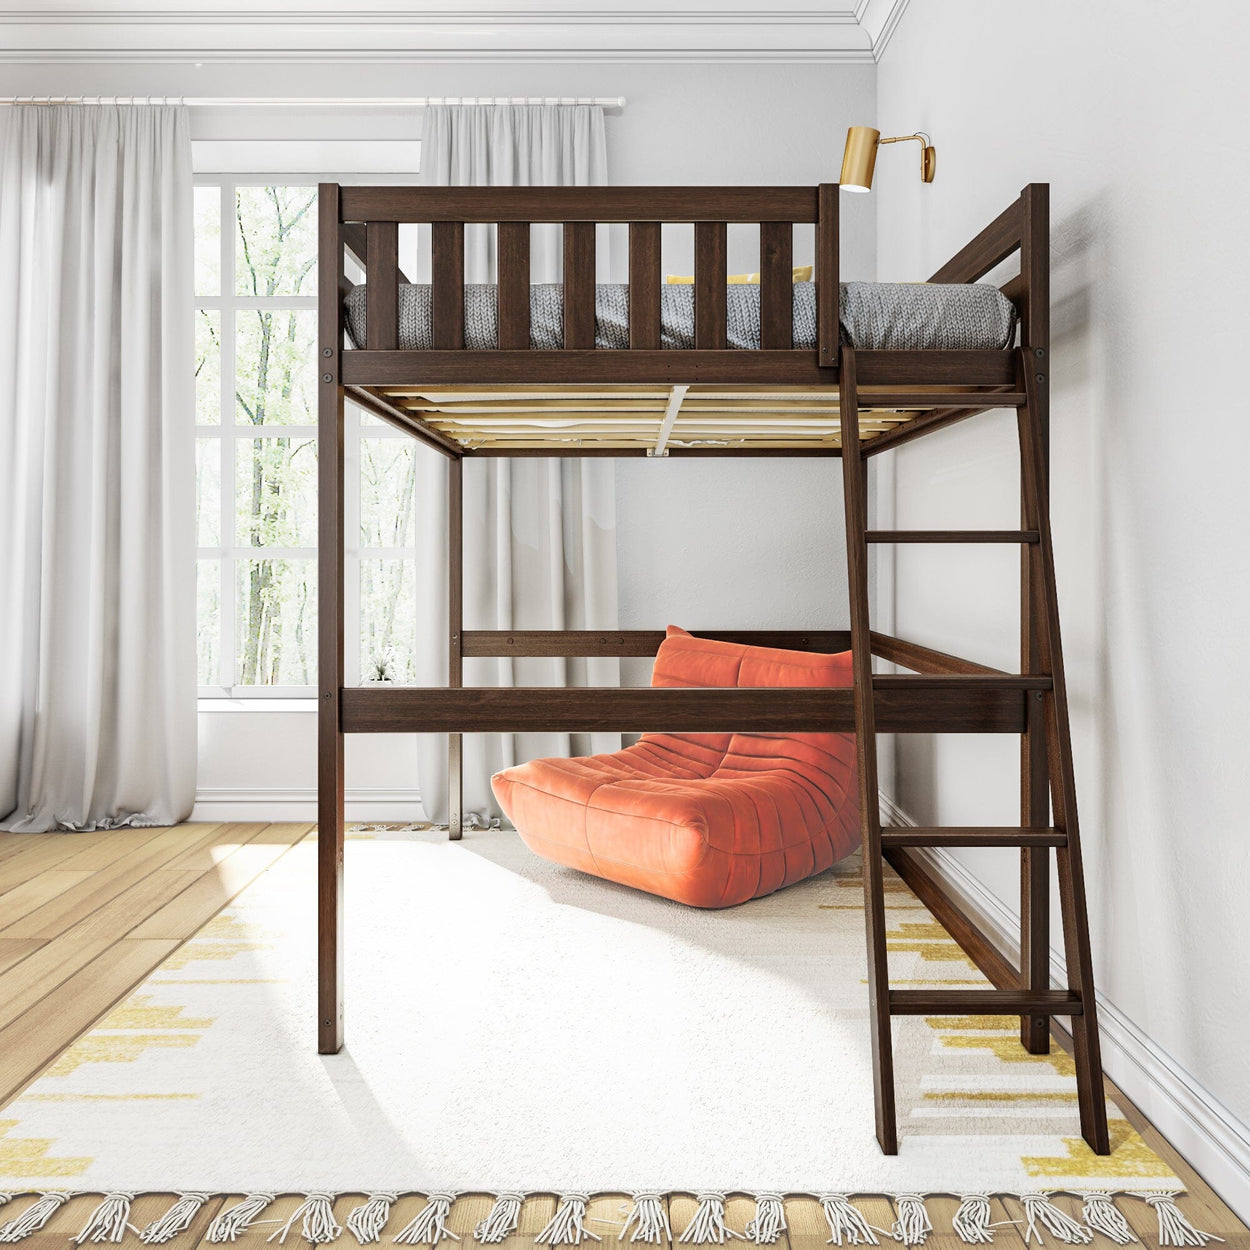 180257-008 : Loft Beds Full-Size High Loft Bed with Ladder on End, Walnut